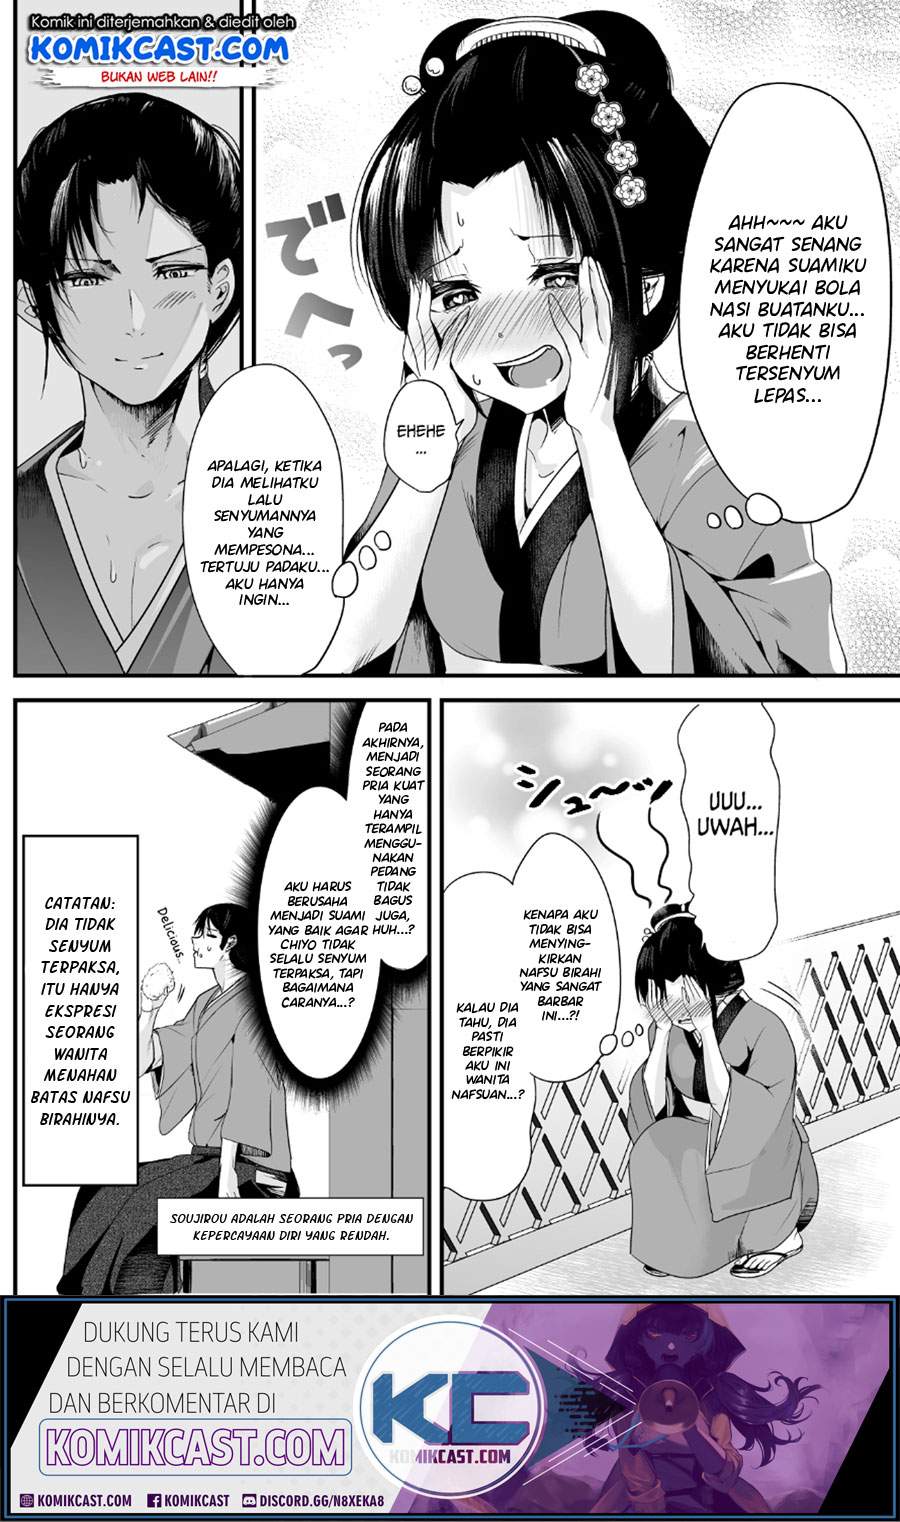 My New Wife Is Forcing Herself to Smile Chapter 02 Bahasa Indonesia